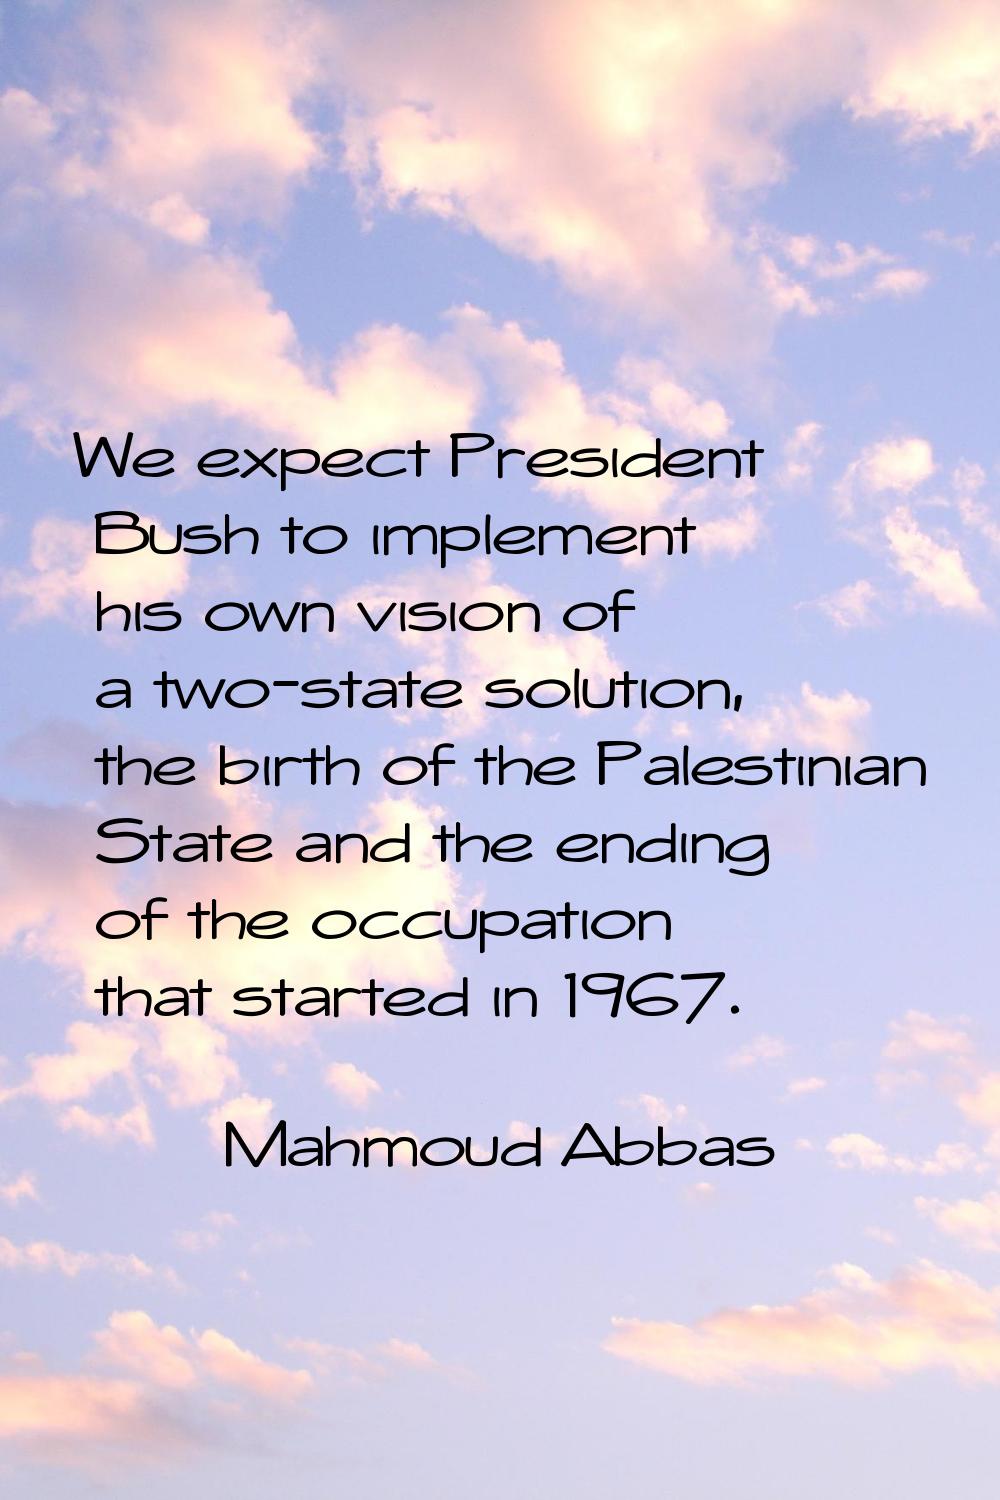 We expect President Bush to implement his own vision of a two-state solution, the birth of the Pale